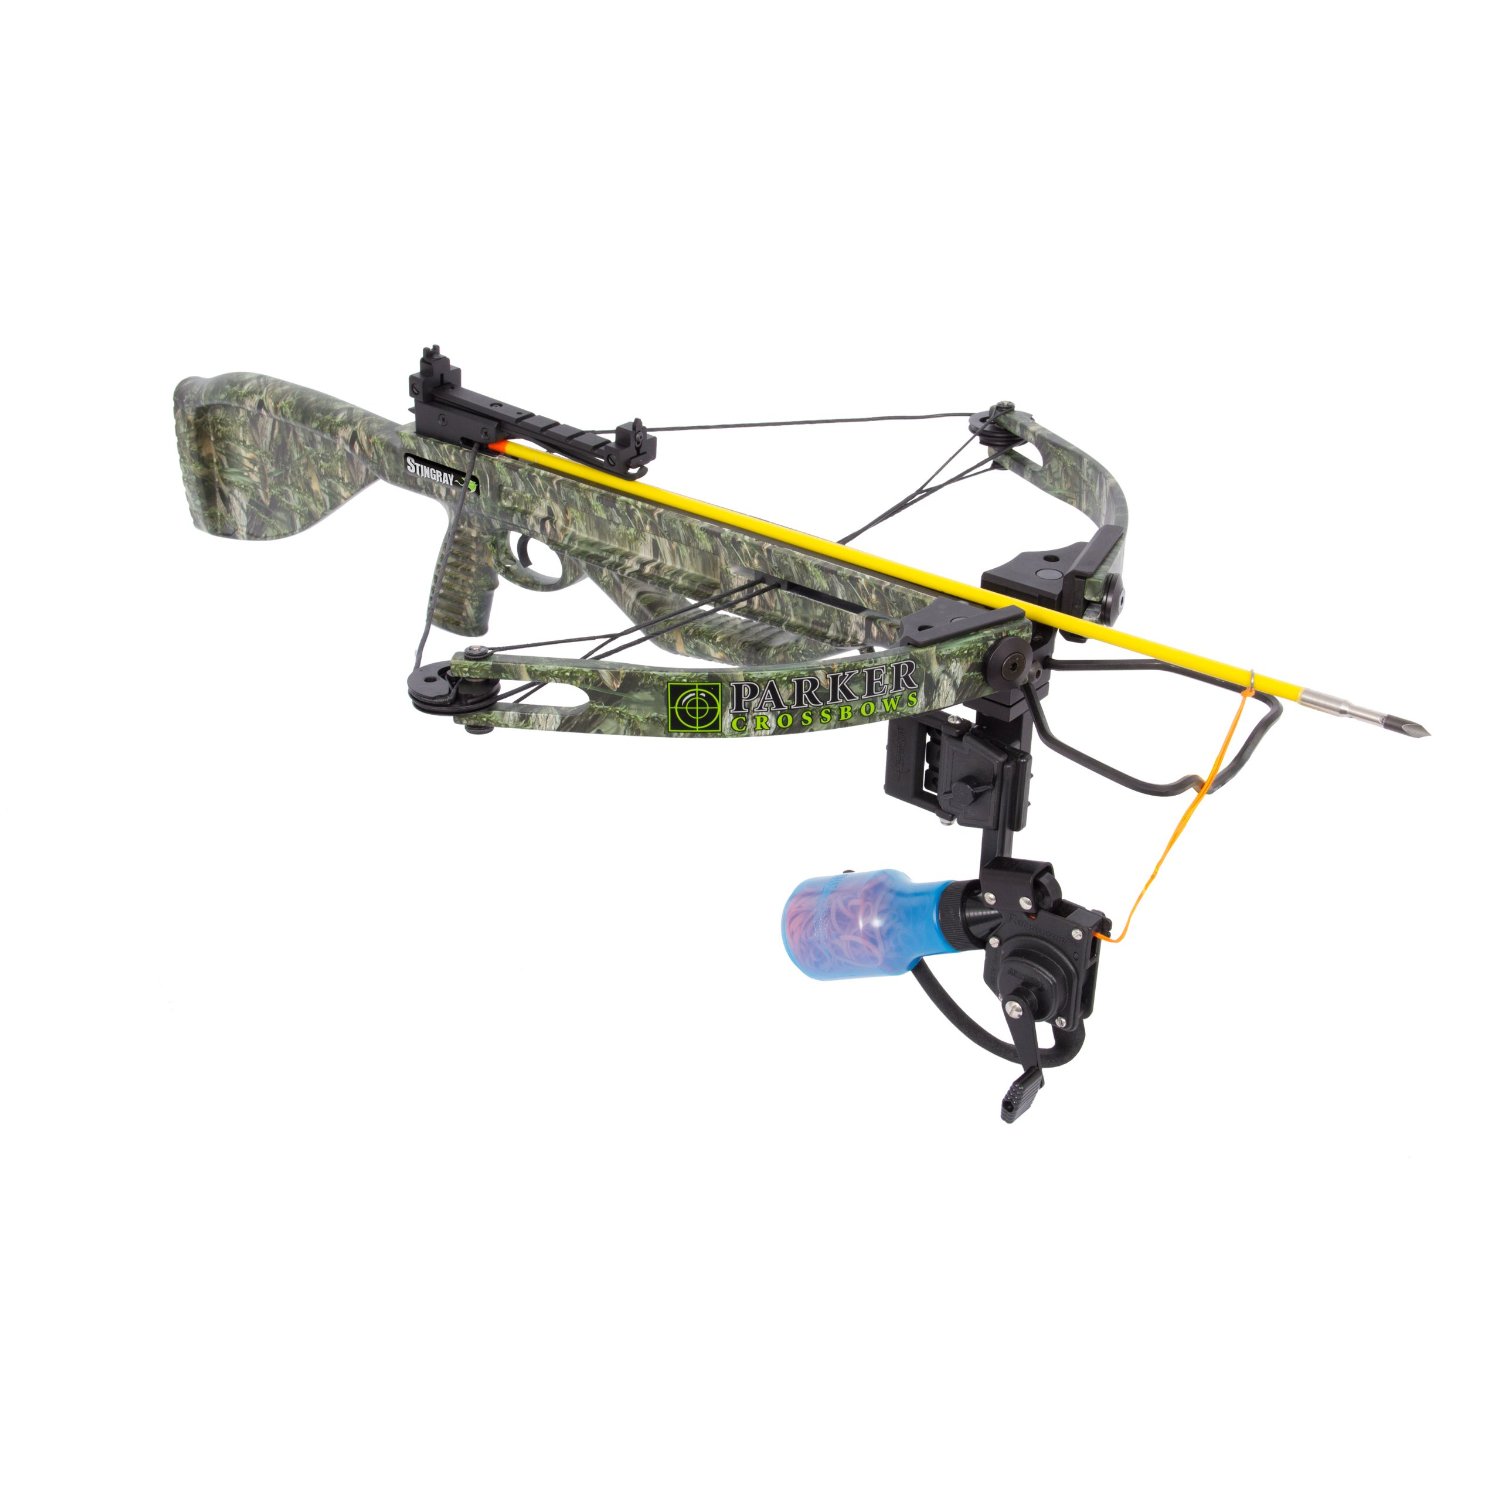 Introducing the HOOKSHOT CROSSBOW for fishing! 